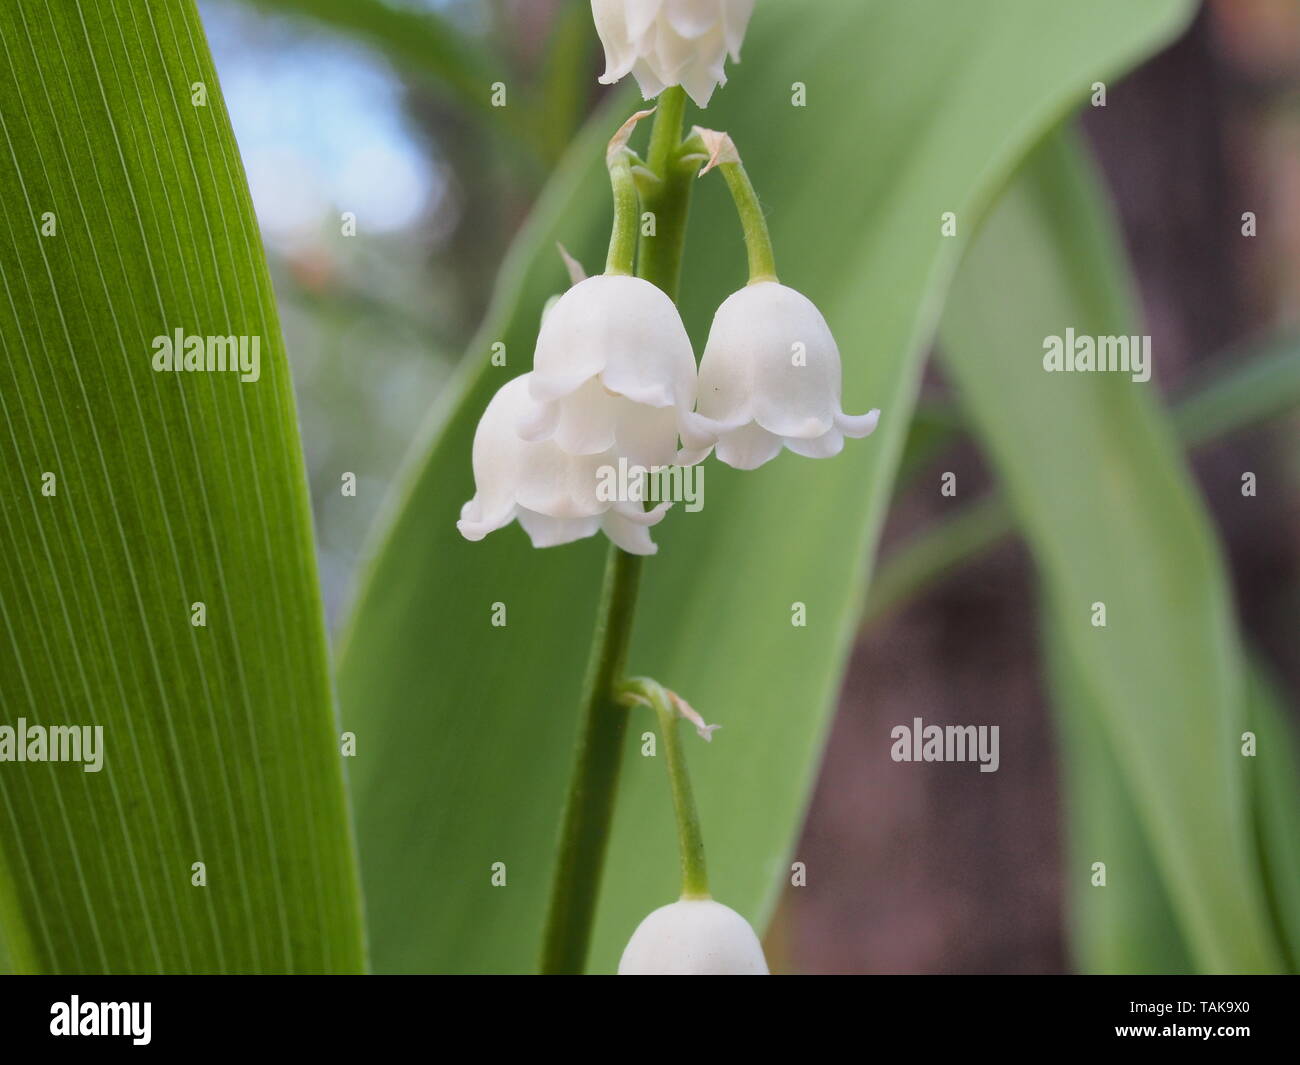 Small white buds of lilies of the valley. Spring wild forest flowers. Macro mode. Stock Photo